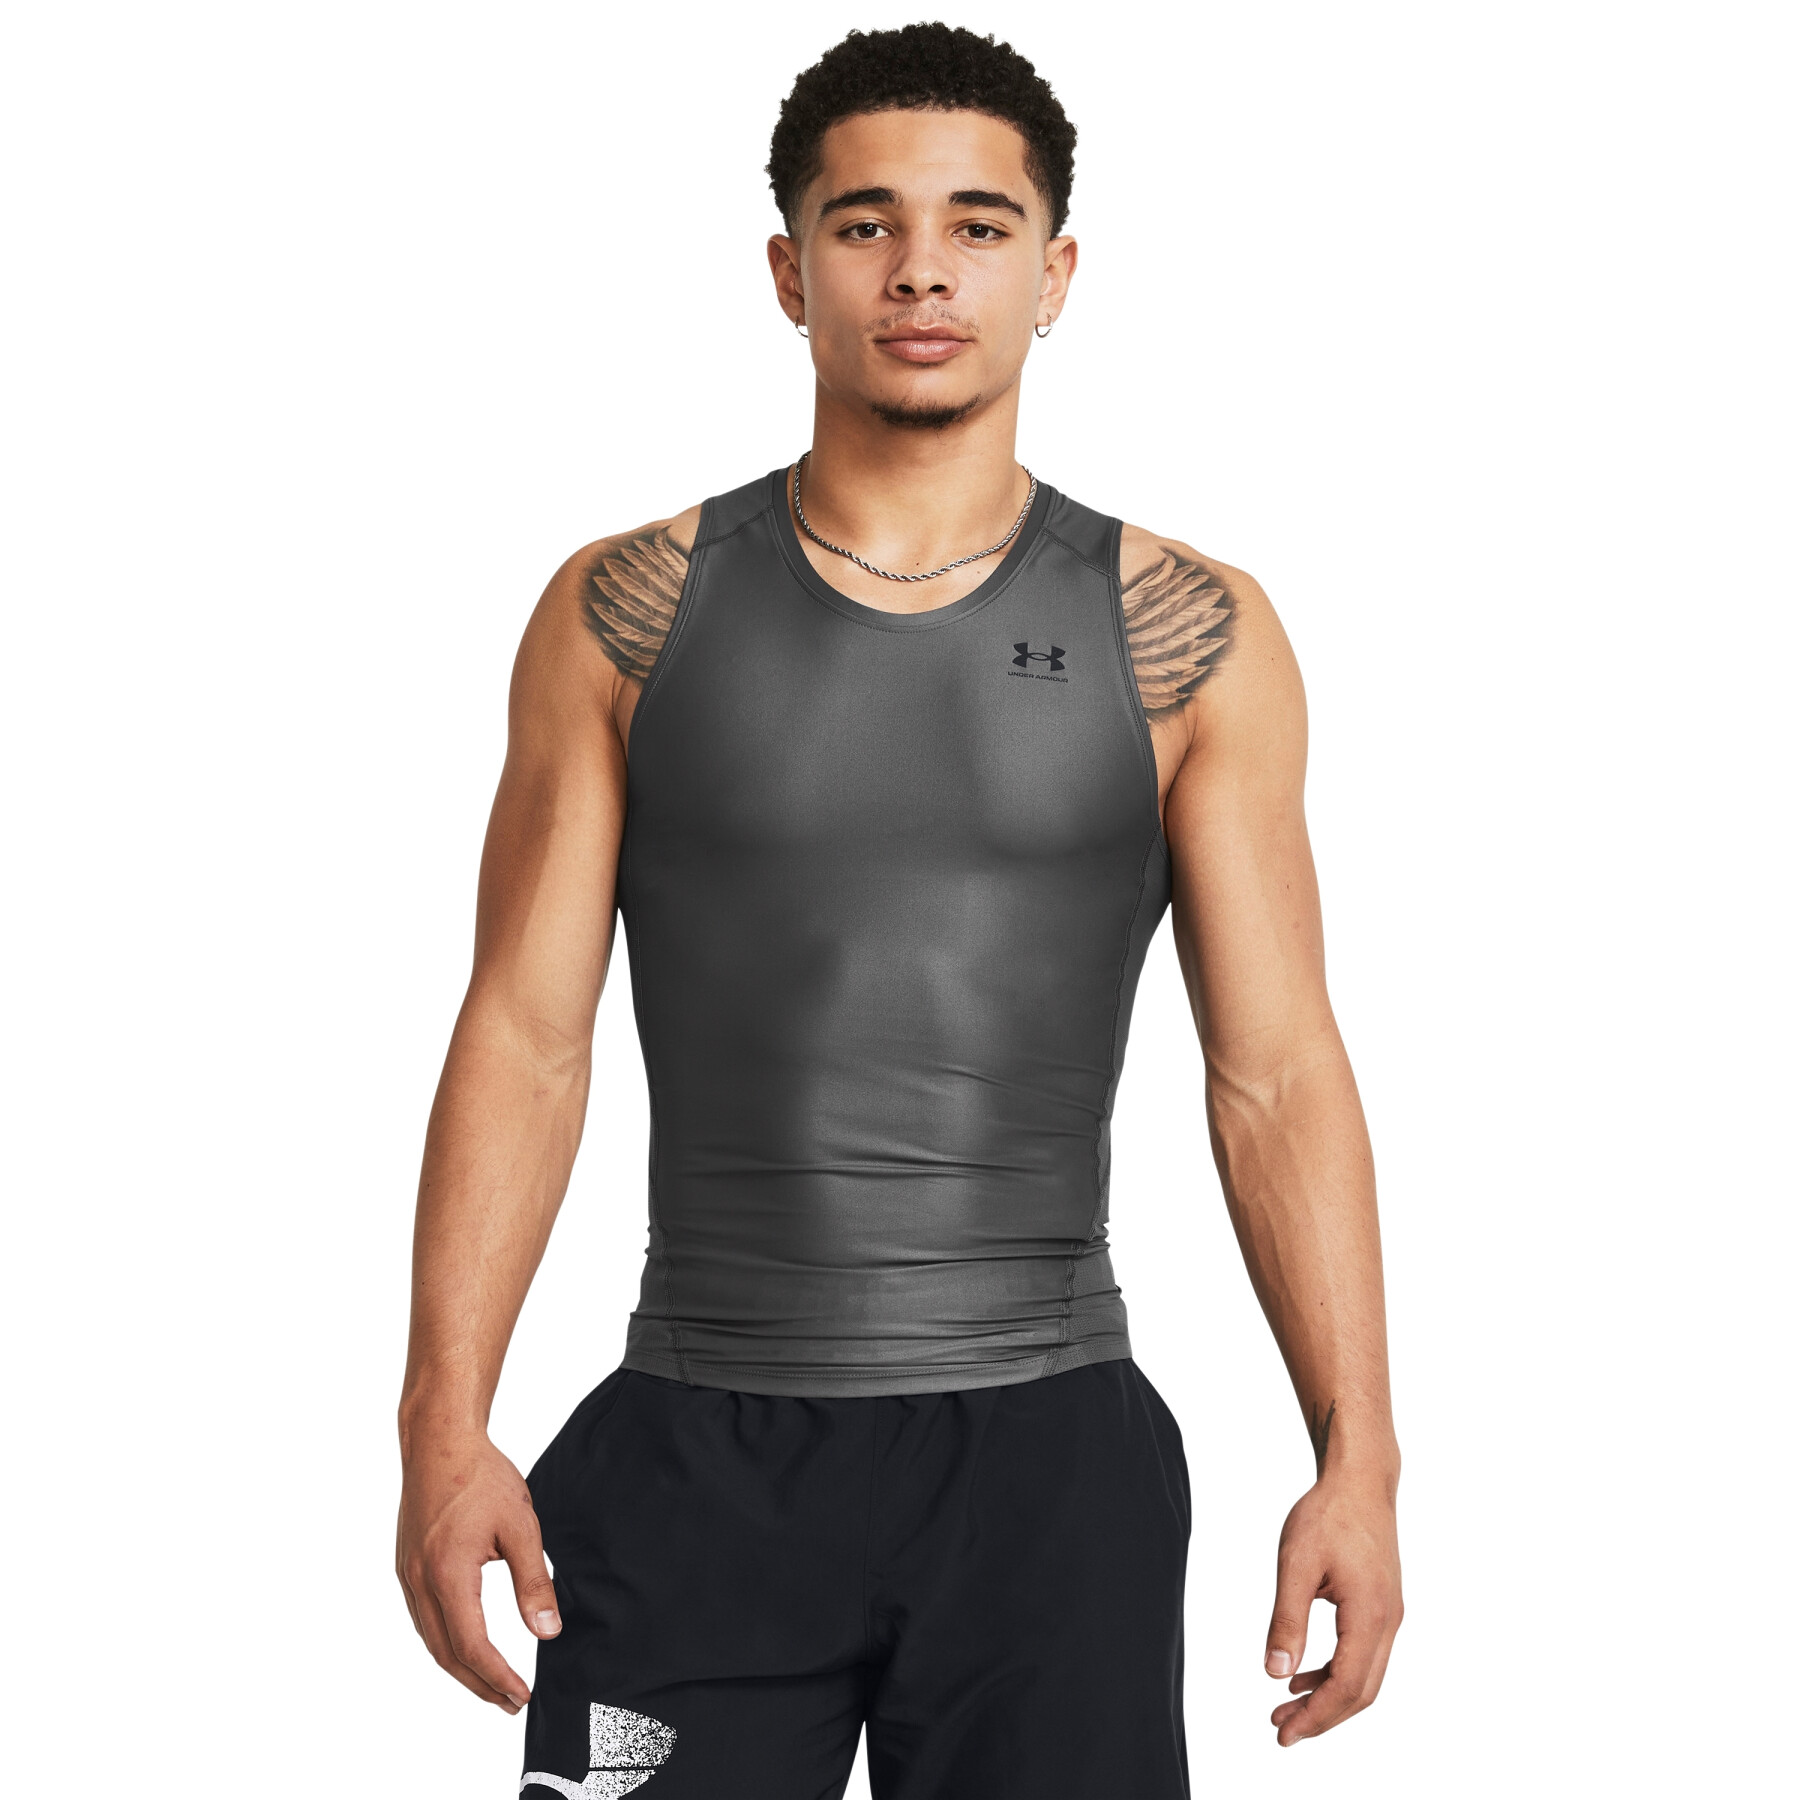 Kompressions-Top Under Armour Iso-Chill